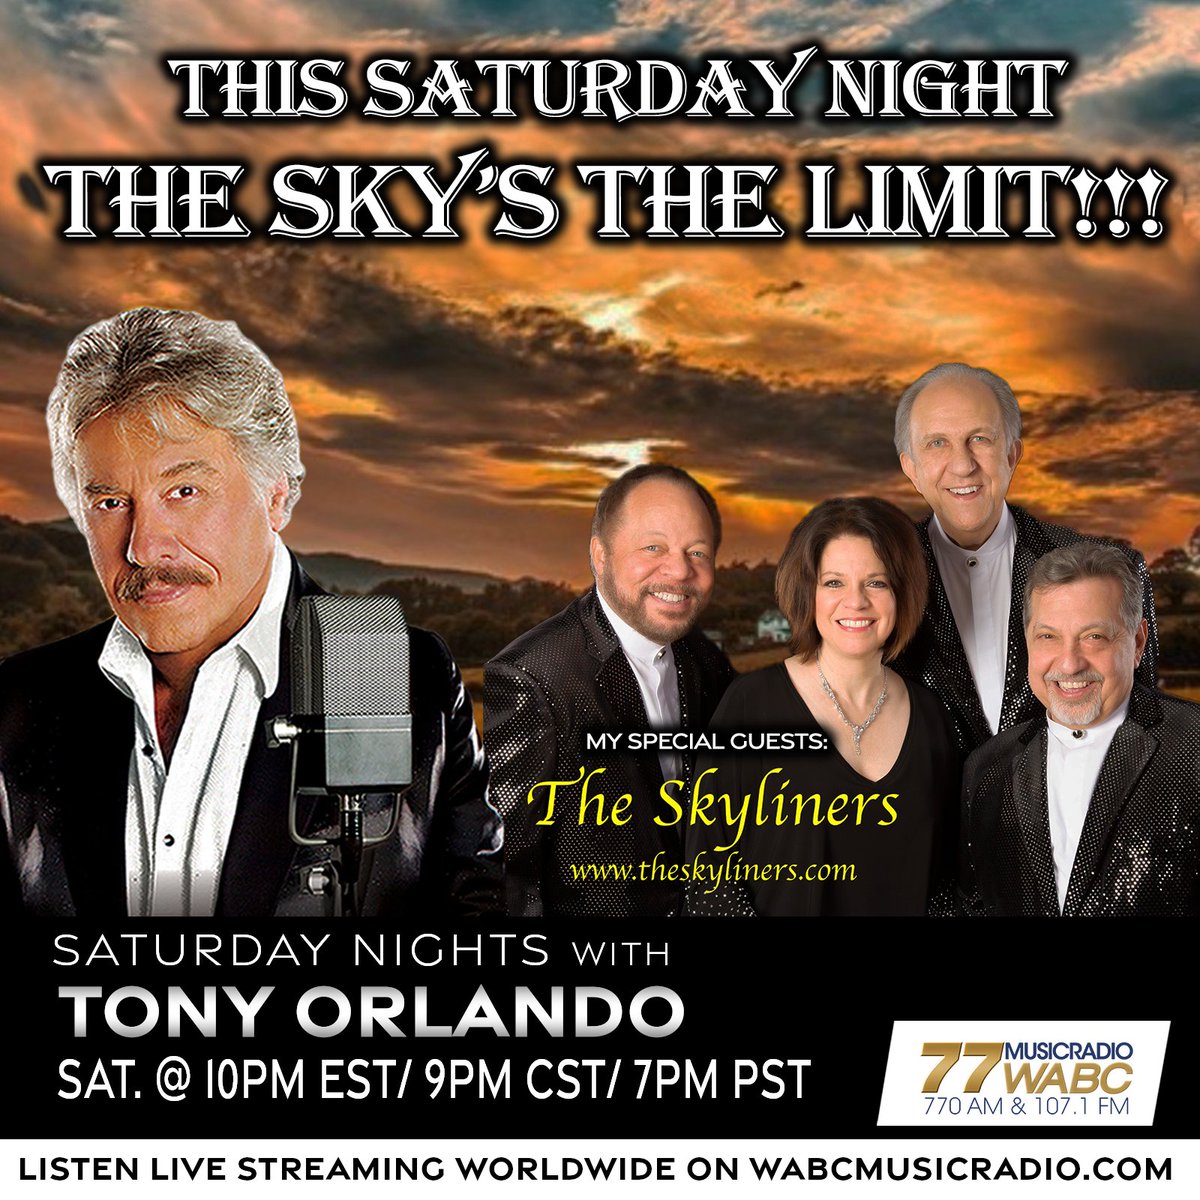 SATURDAY at 10PM: The Sky's the Limit!!! Host @TonyOrlando will have special guests The Skyliners on the show! Join us SATURDAY from 10PM-midnight on wabcmusicradio.com, 770 AM, or on the 77 WABC app! #77WABCRadio #Music #TonyOrlando